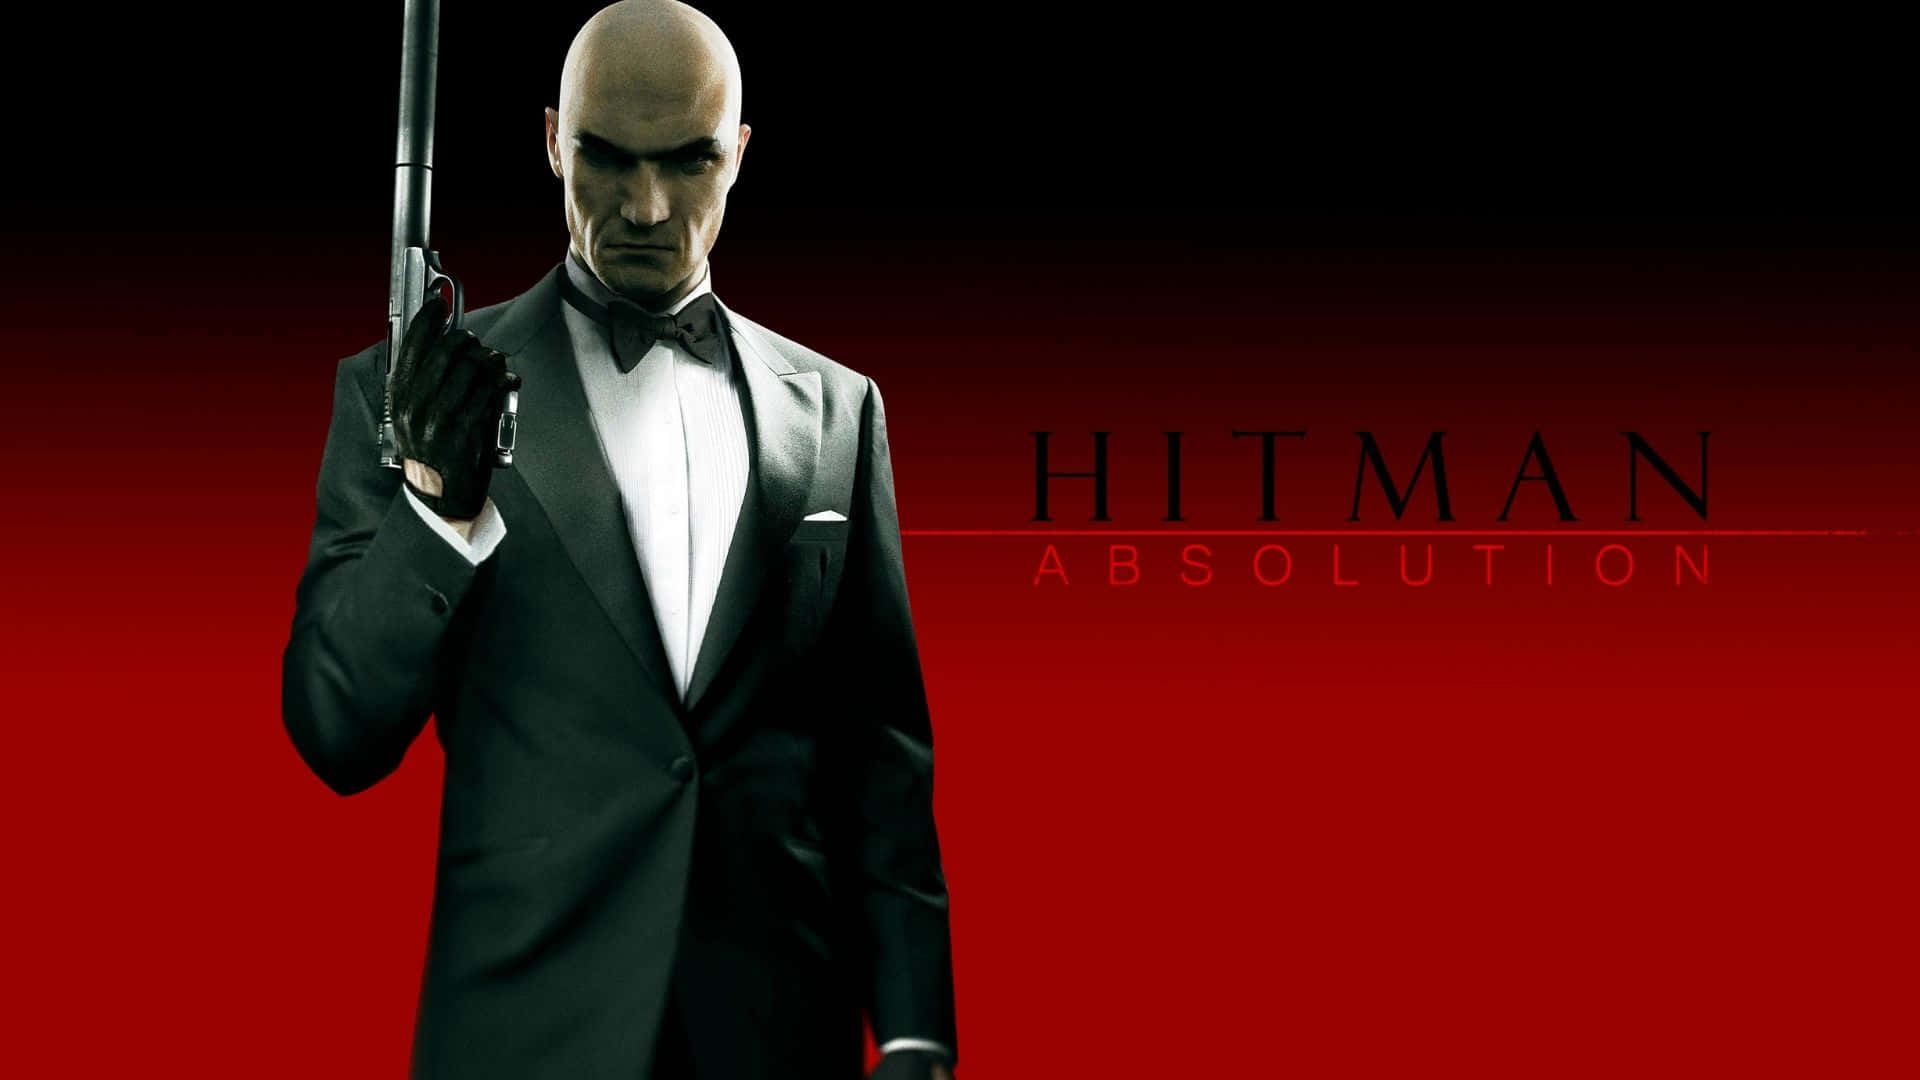 Agent 47 taking out the target in Hitman Absolution